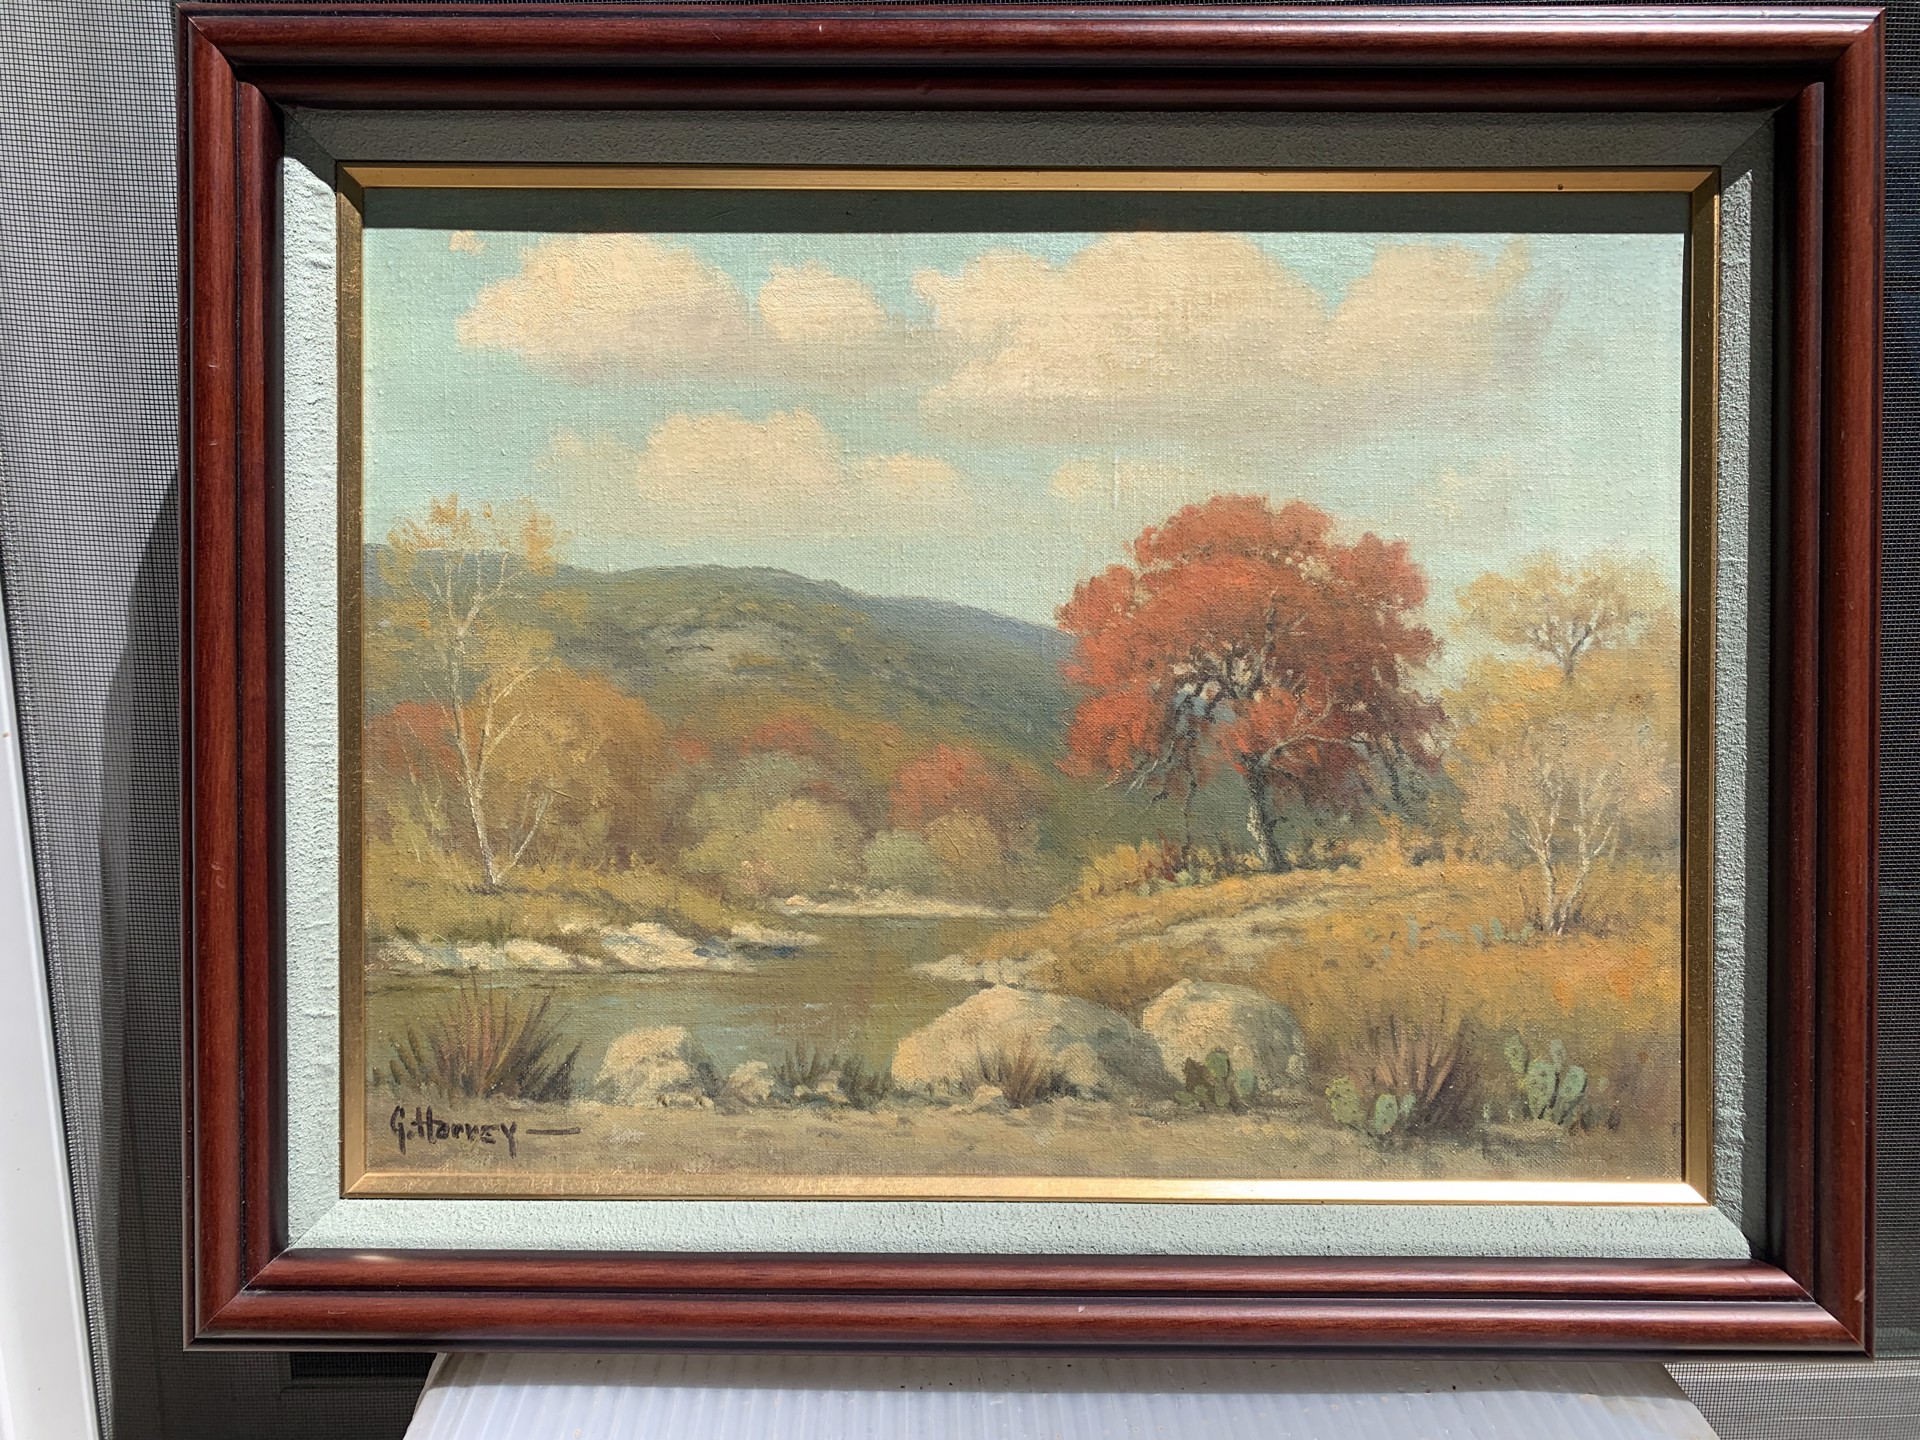 Fall Hill Country Scene by G. Harvey